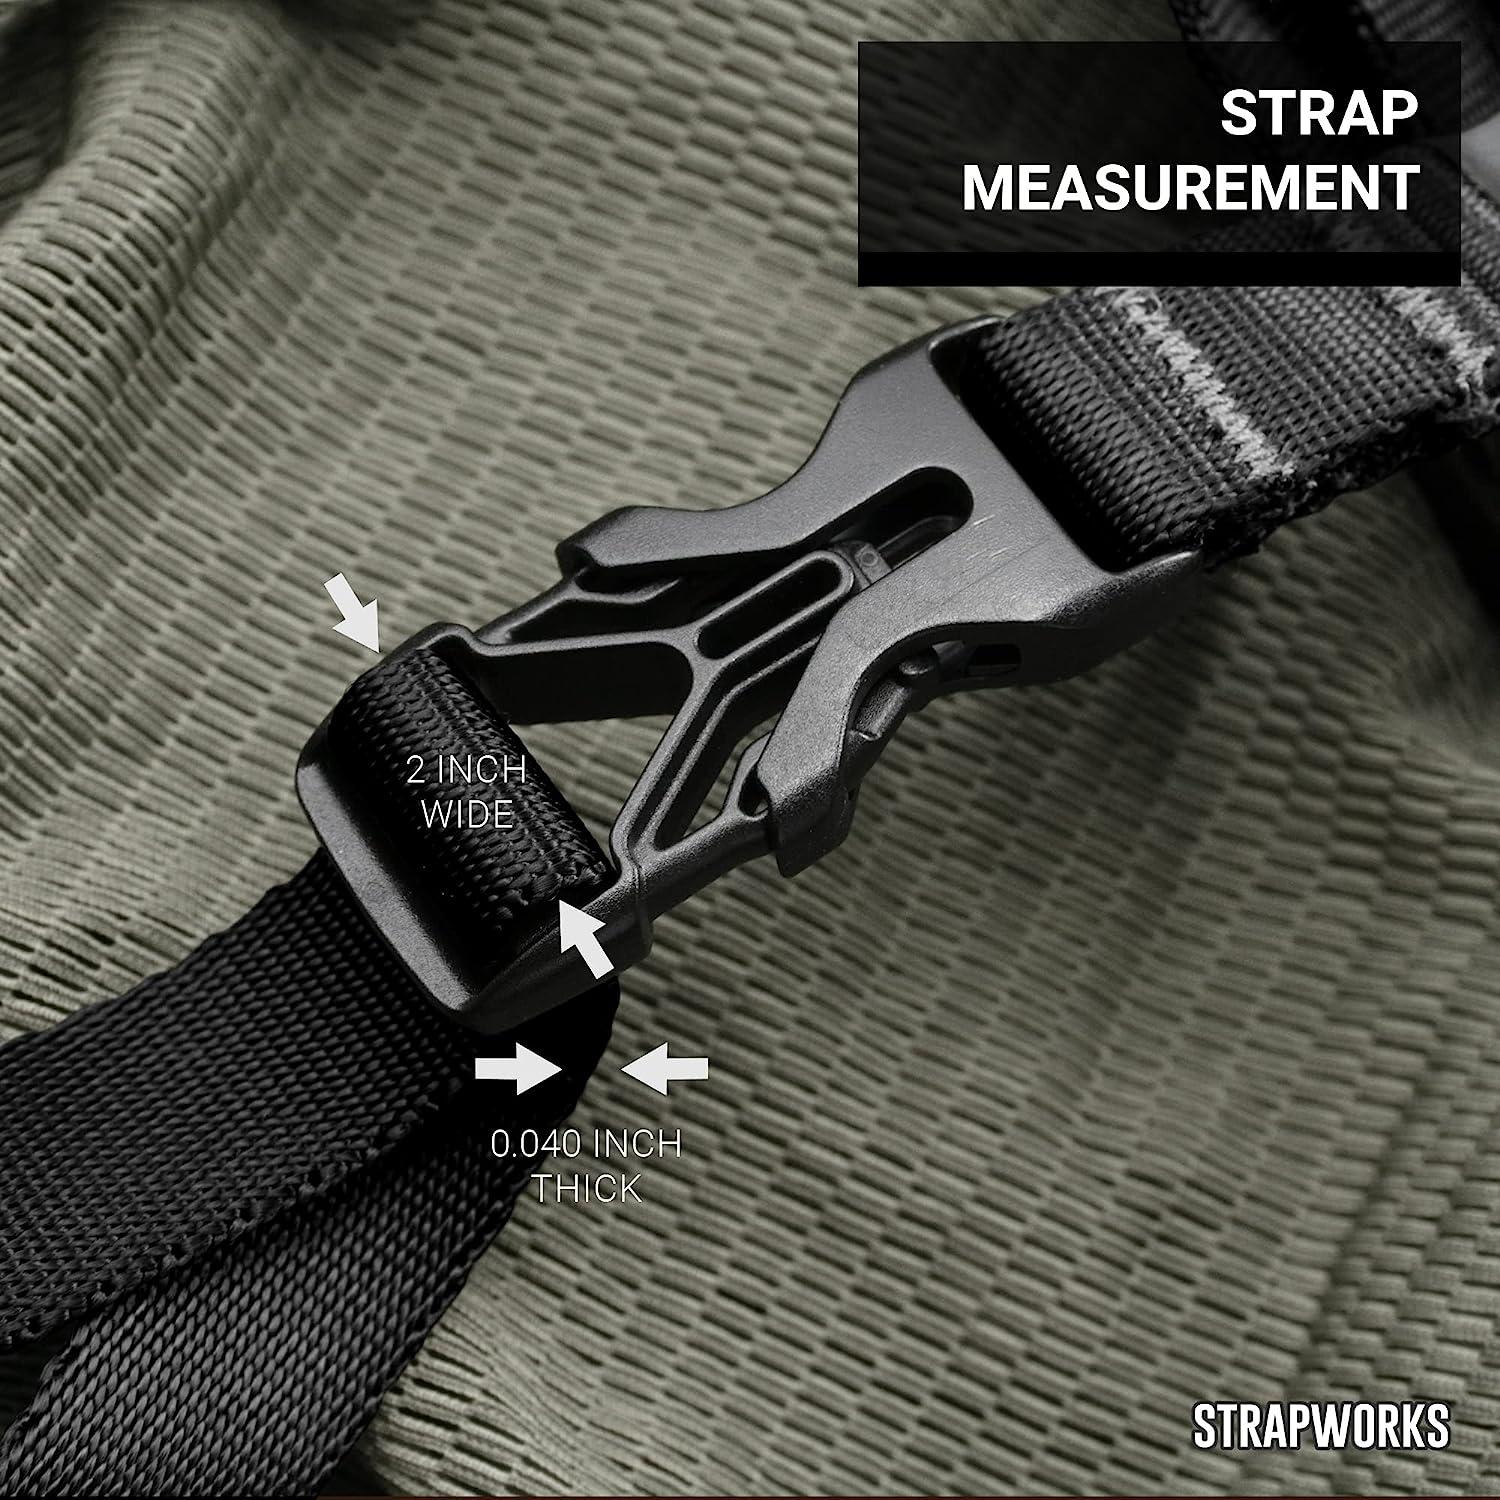 Strapworks Military Spec Flat Nylon Webbing MilSpec 17338 Strap For Slings,  Backpack Straps, Tactical Projects Made in USA, 1 Inch x 10 Yards, 6 Colors  Black